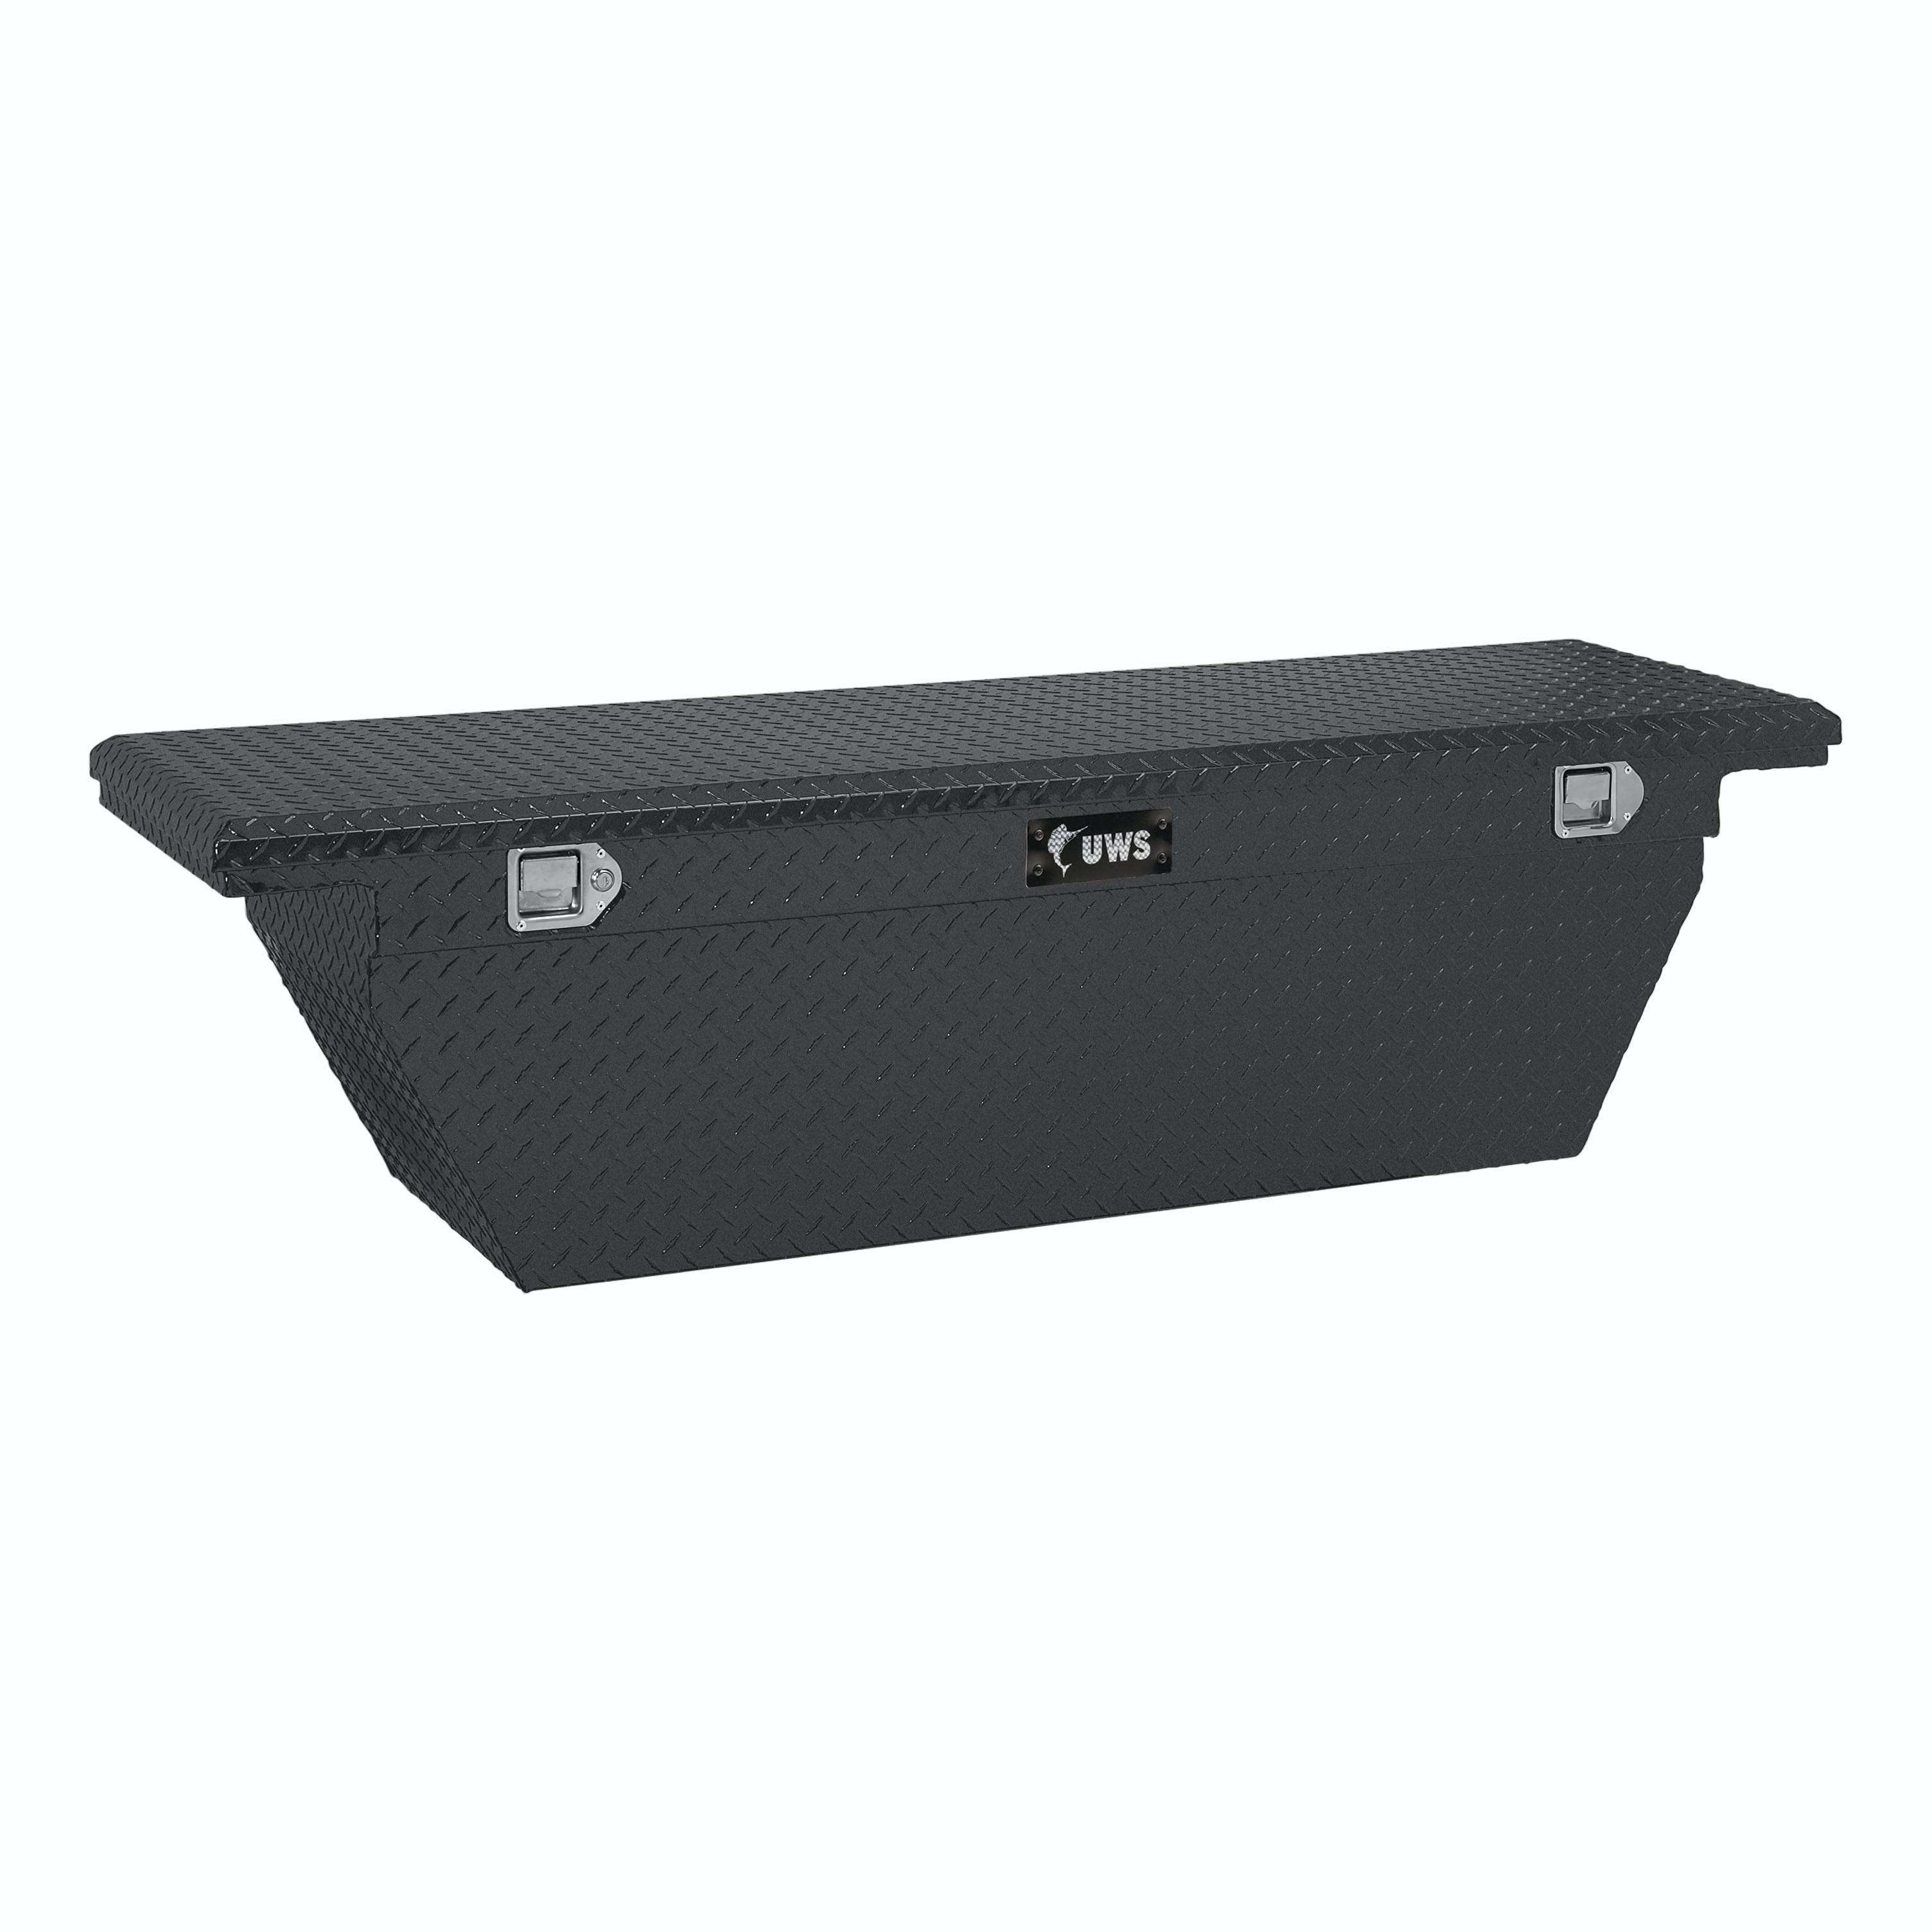 UWS TBSD-69-A-LP-B 69 inch Aluminum Single Lid Crossover Toolbox Deep Low Profile Angled Black